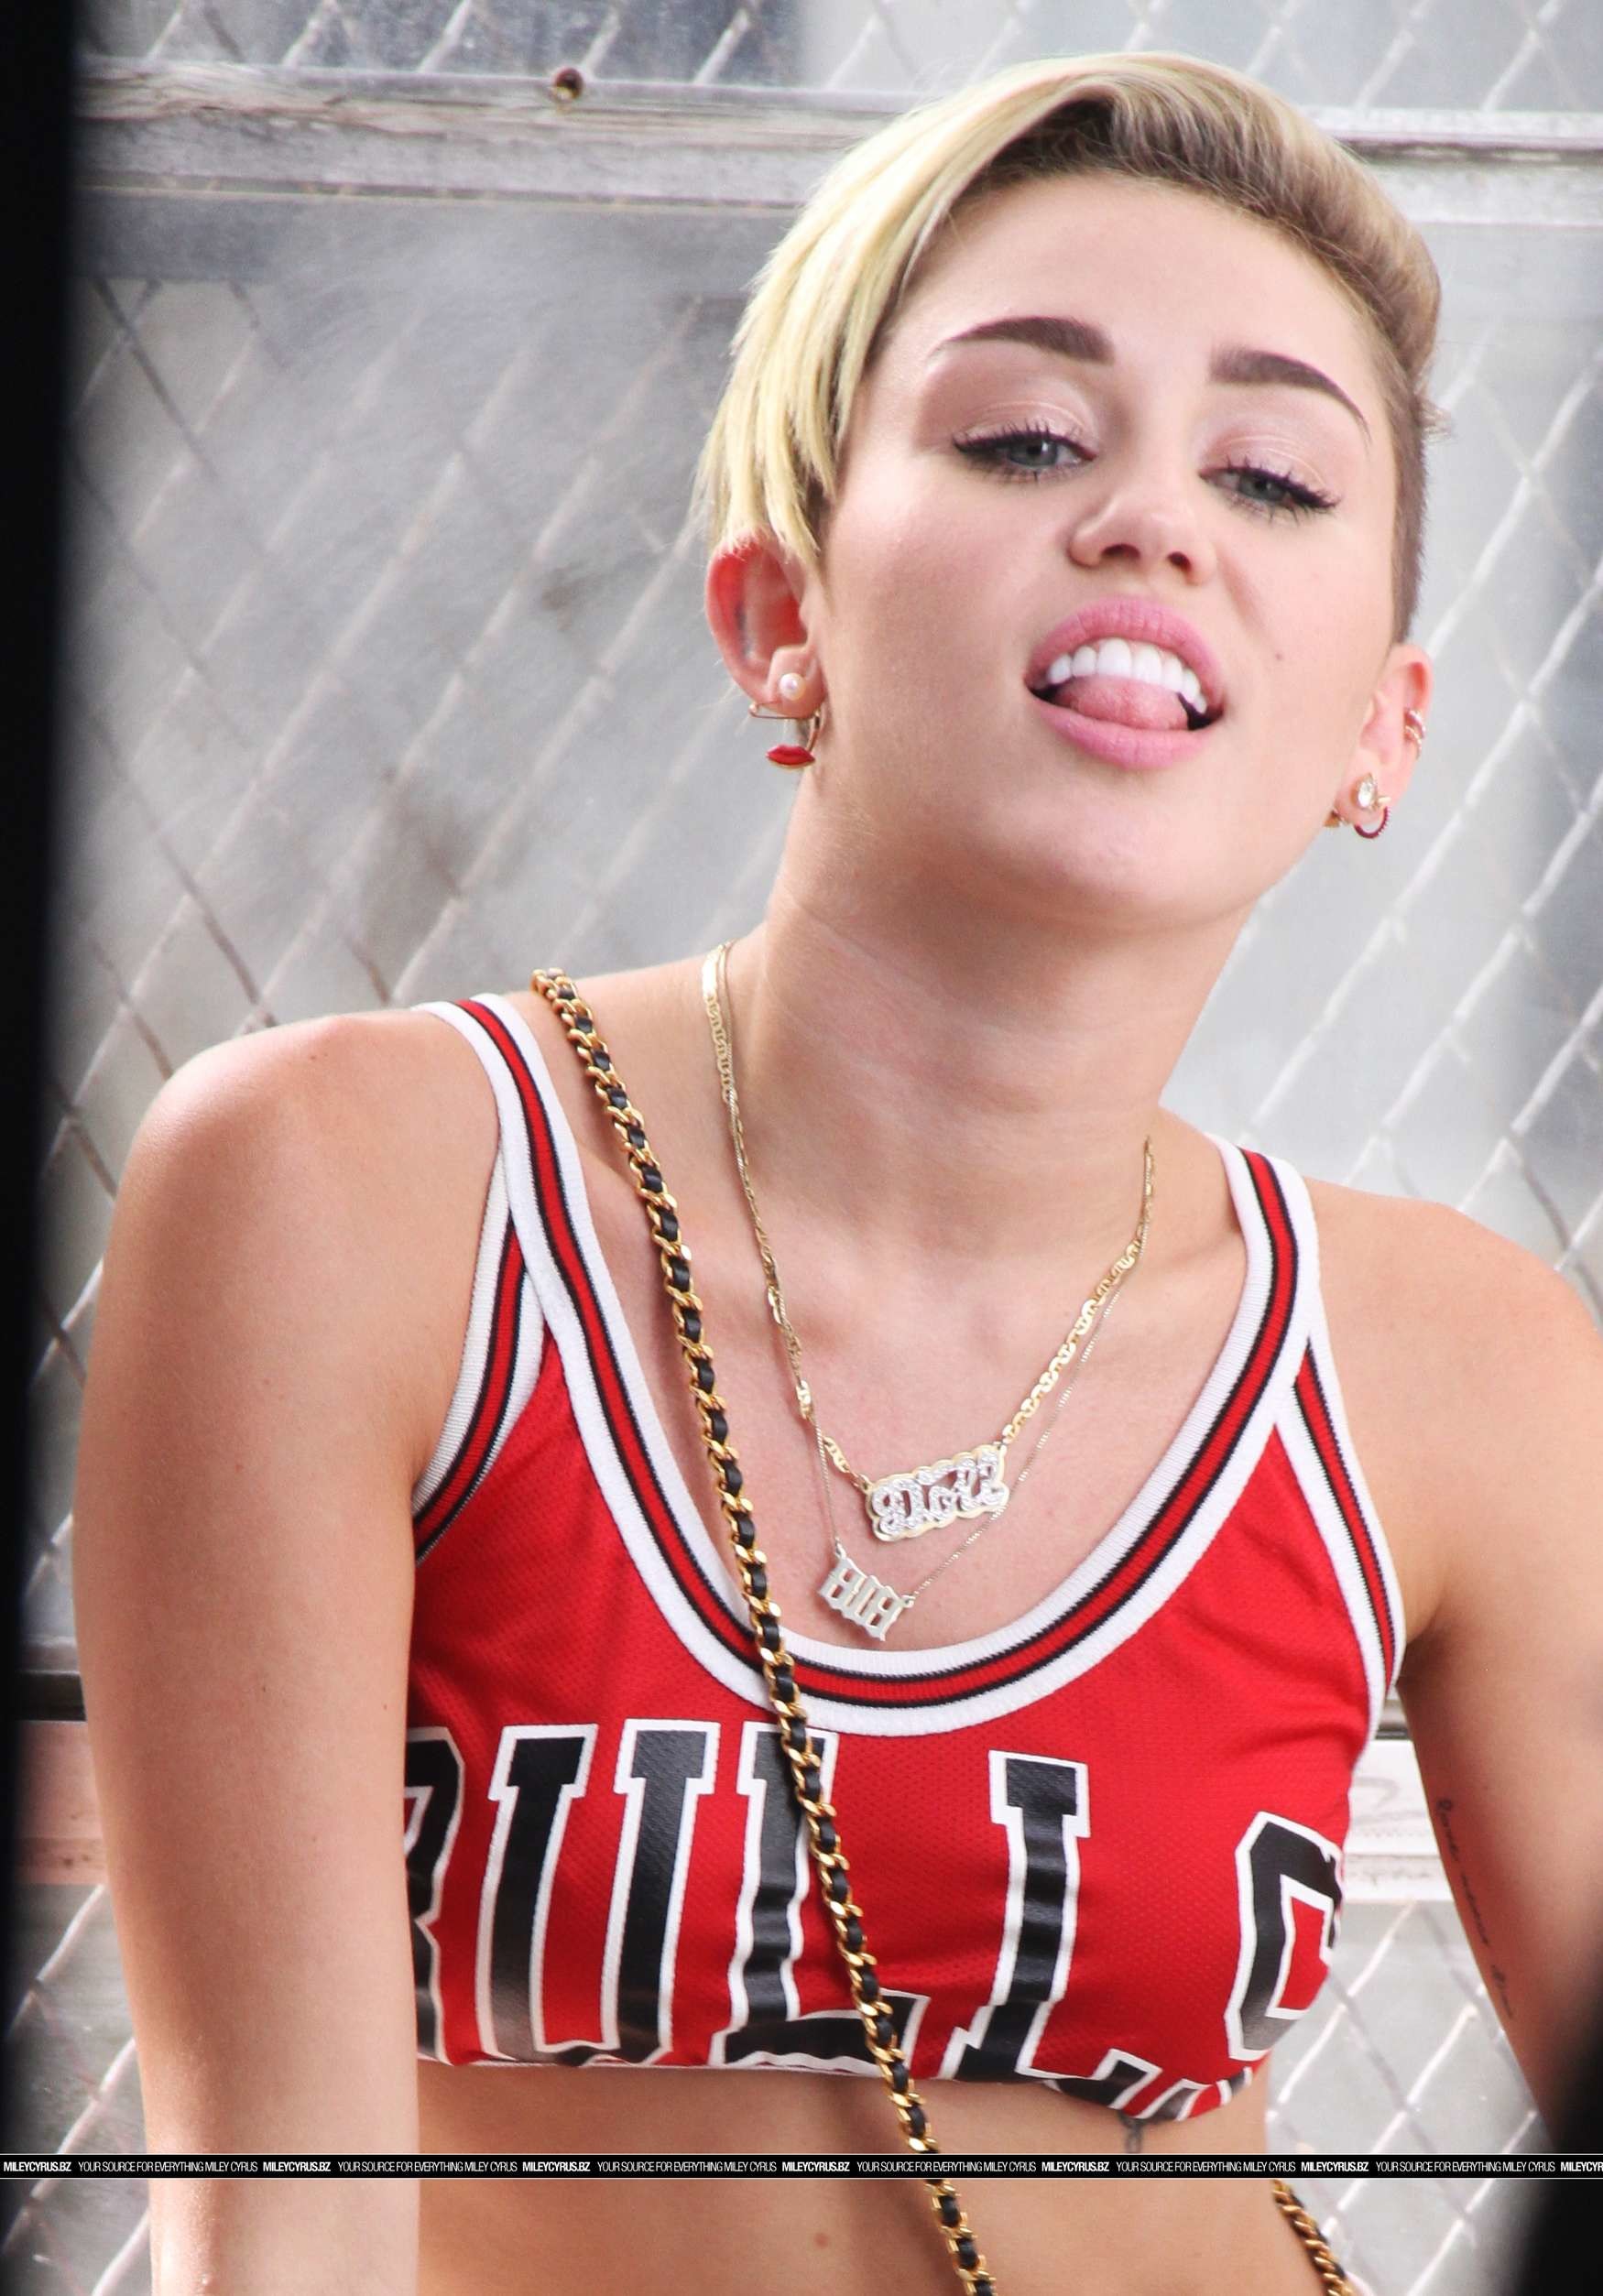 Miley Cyrus Wallpapers - Top 25 Best Miley Cyrus Wallpapers [ HQ ]